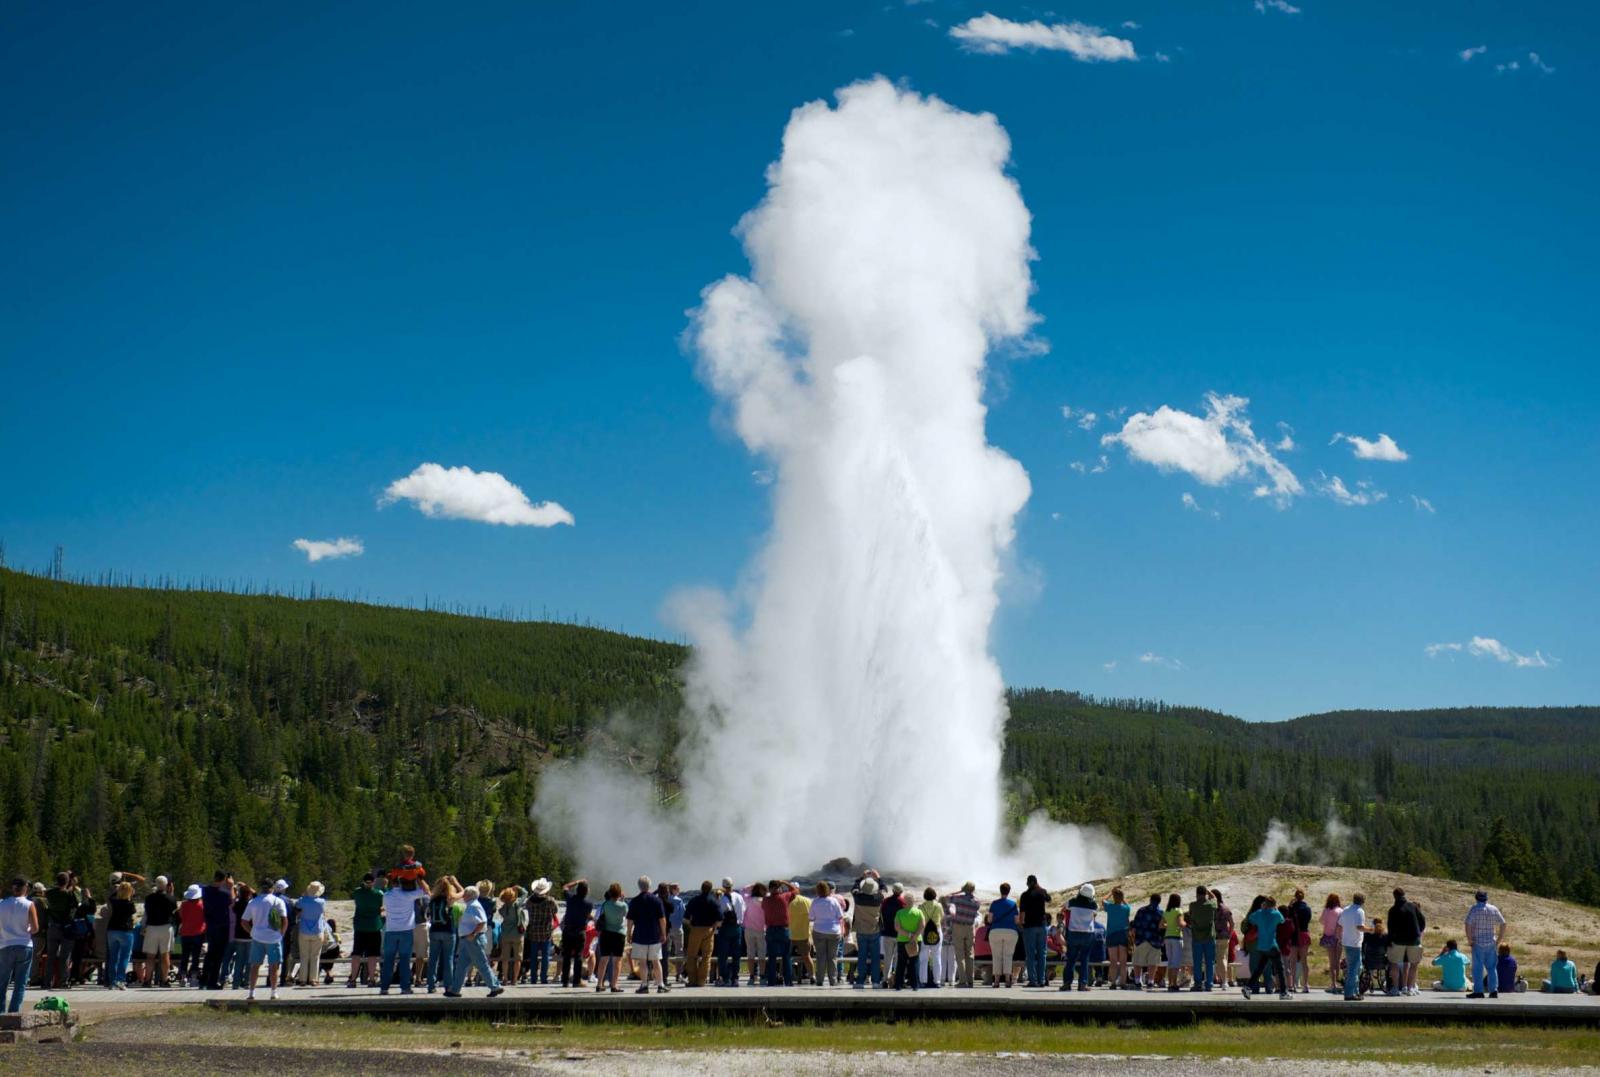 Do You Have the Smarts to Pass This US States Quiz? Old Faithful